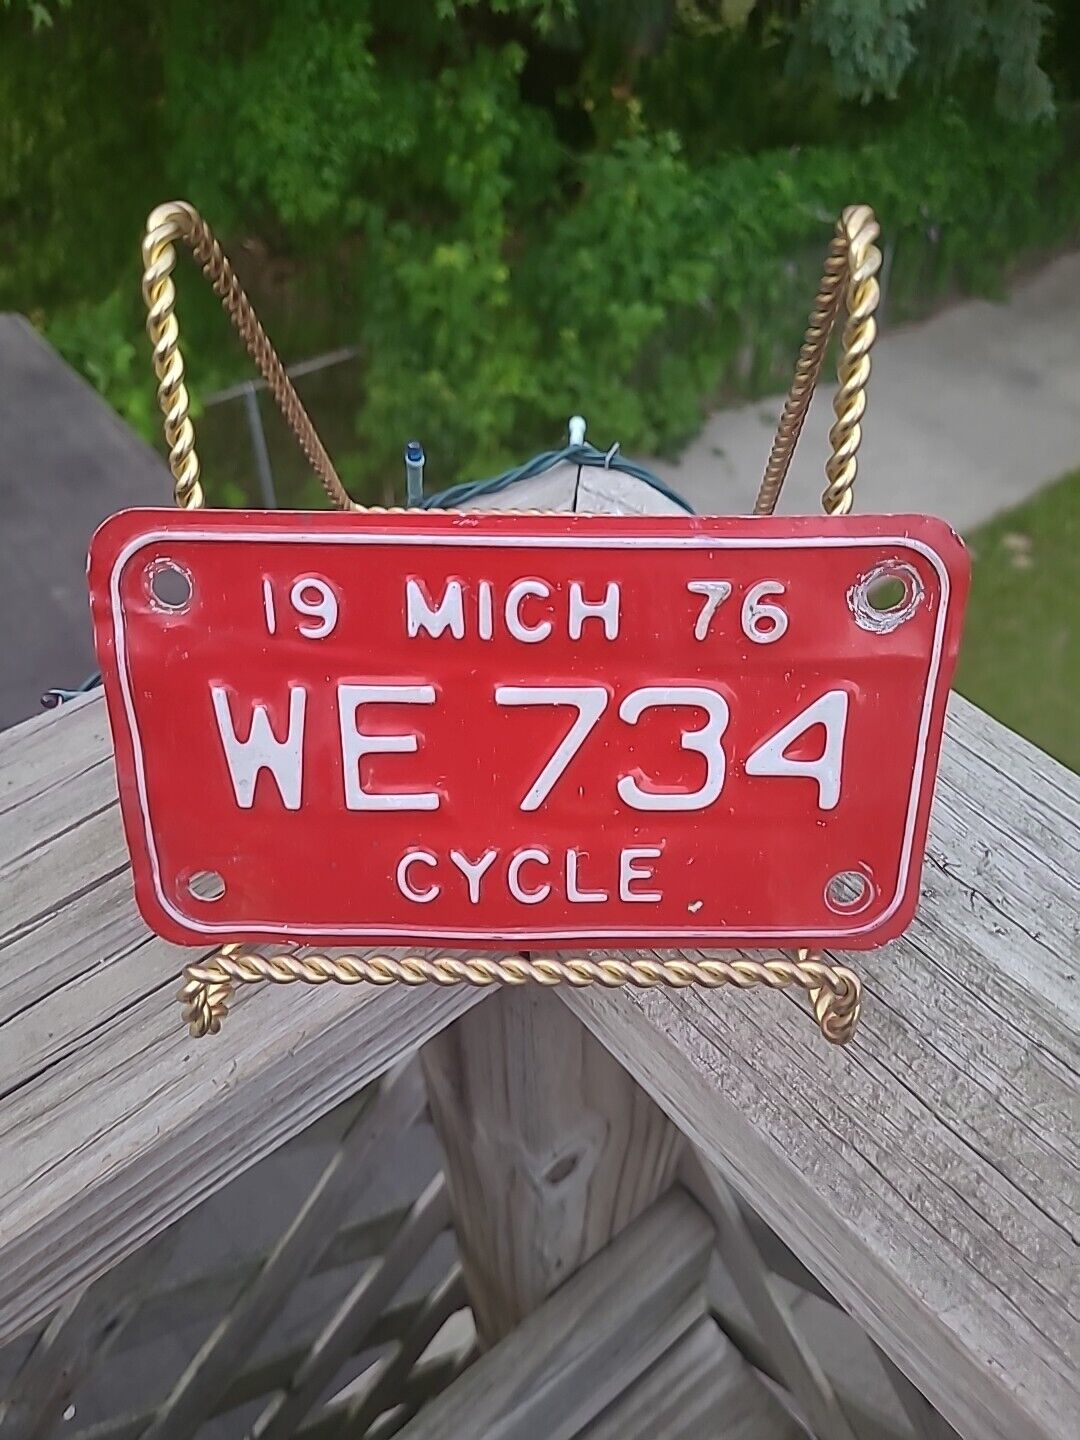 1976 Michigan License Plate Motorcycle # WE 734 Vintage Red White